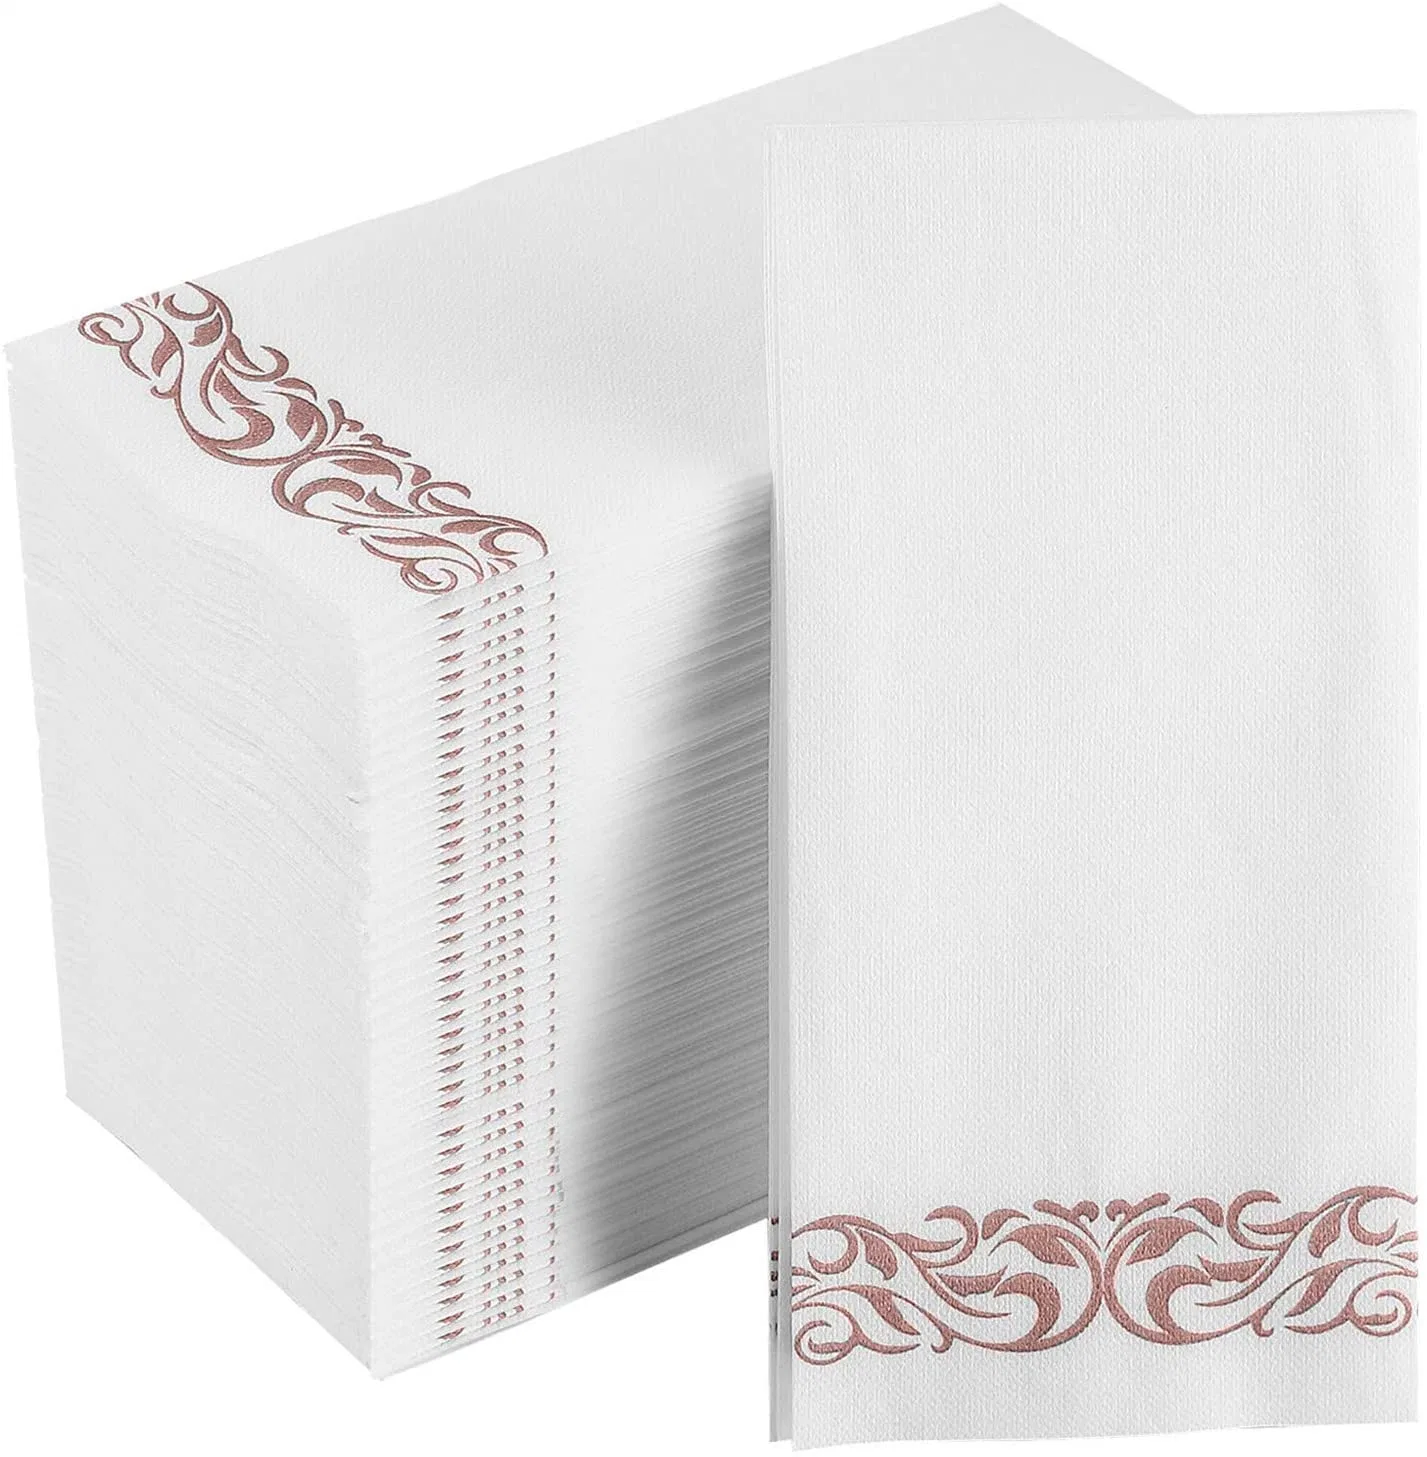 [200 Pack] Disposable Guest Towels Soft and Absorbent Linen-Feel Paper Hand Towels Durable Decorative Bathroom Hand Napkins for Kitchen, Parties, Weddings